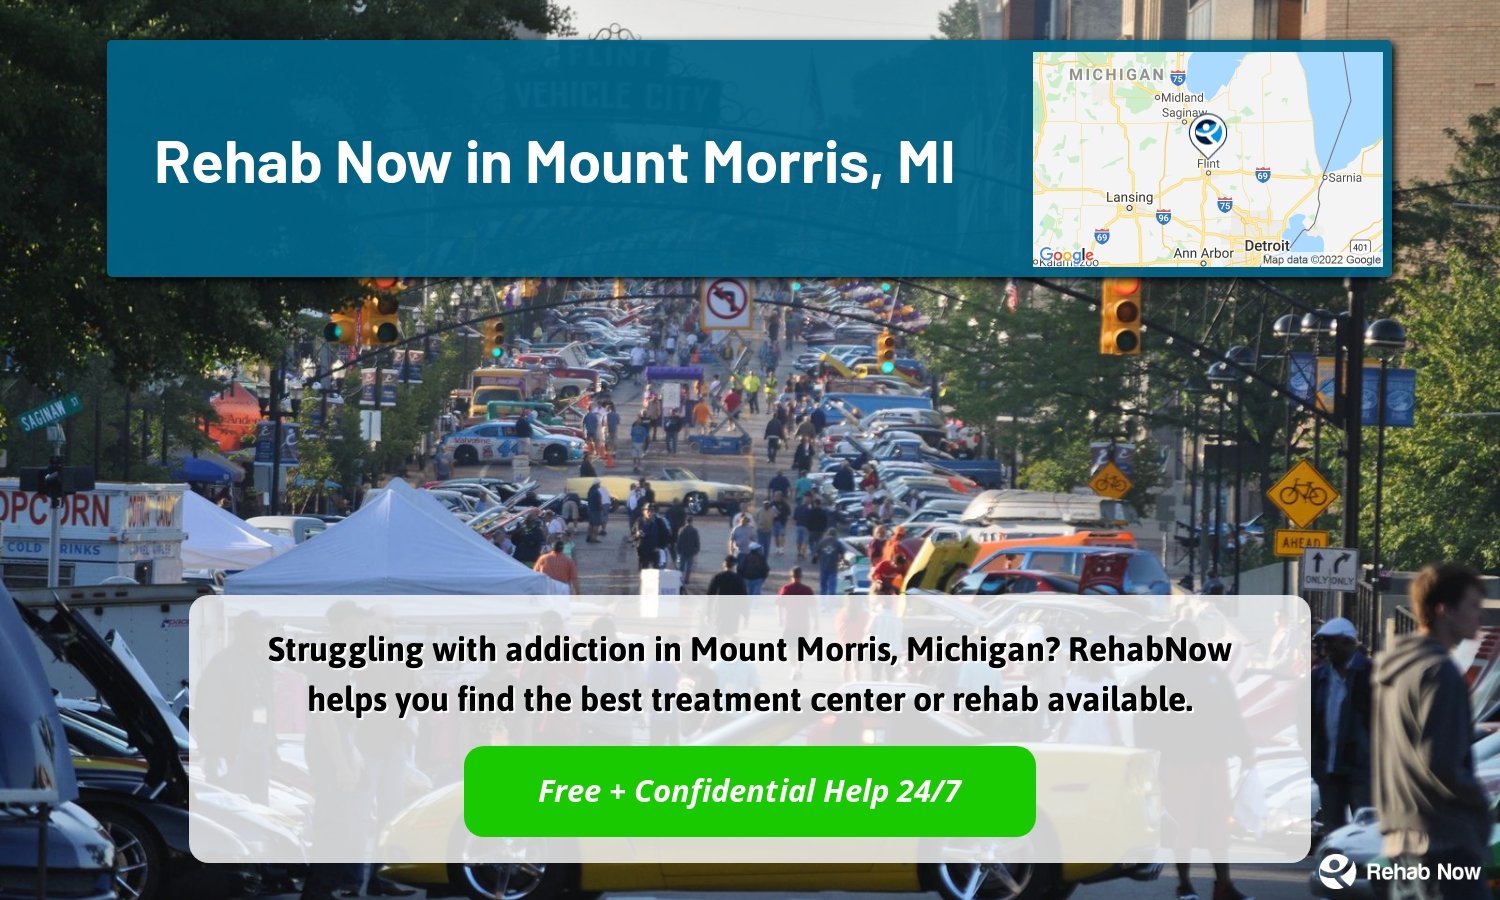 Struggling with addiction in Mount Morris, Michigan? RehabNow helps you find the best treatment center or rehab available.